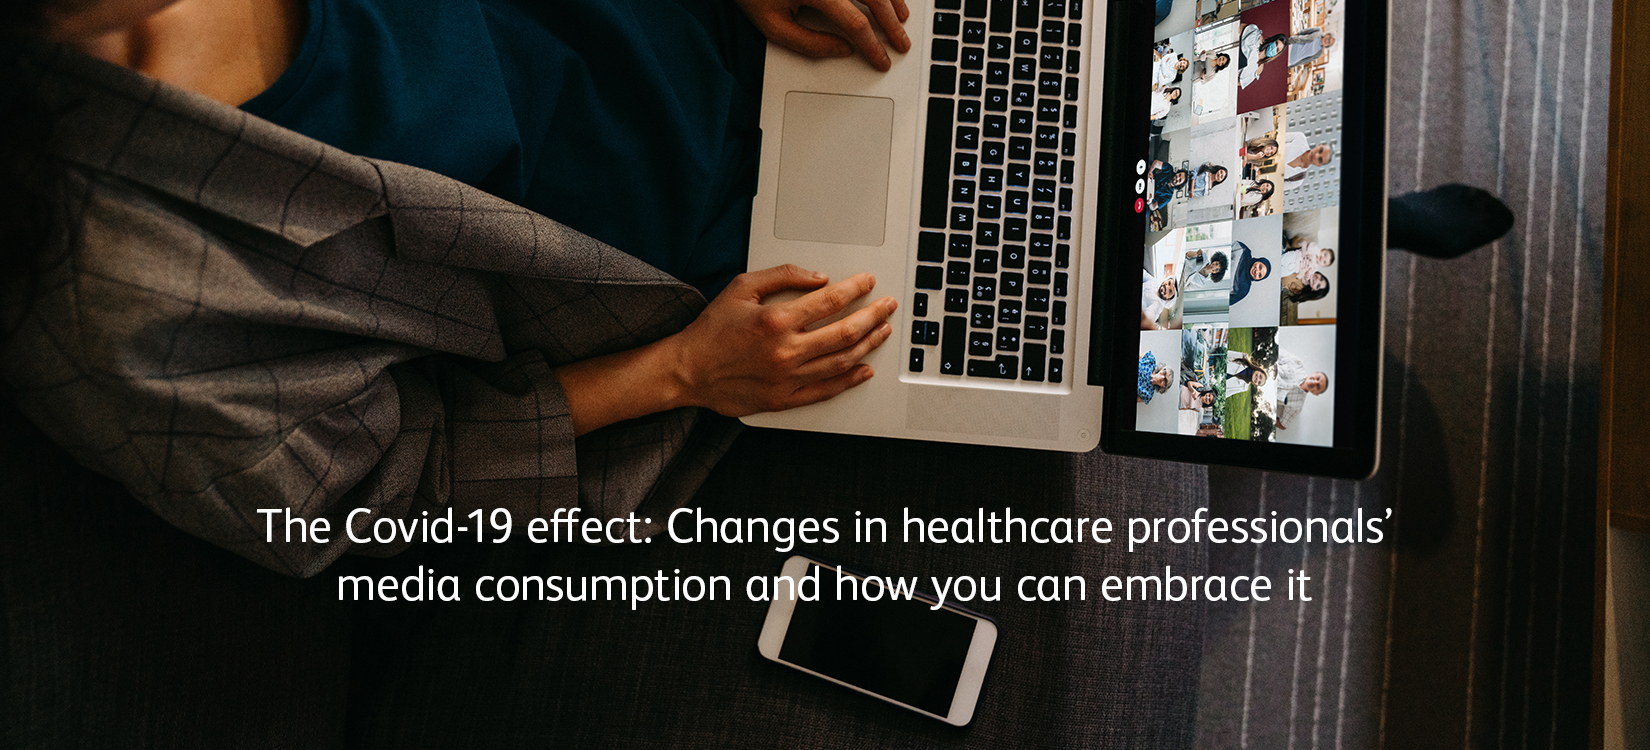 The Covid-19 effect: Changes in healthcare professionals’ media consumption and how you can embrace it